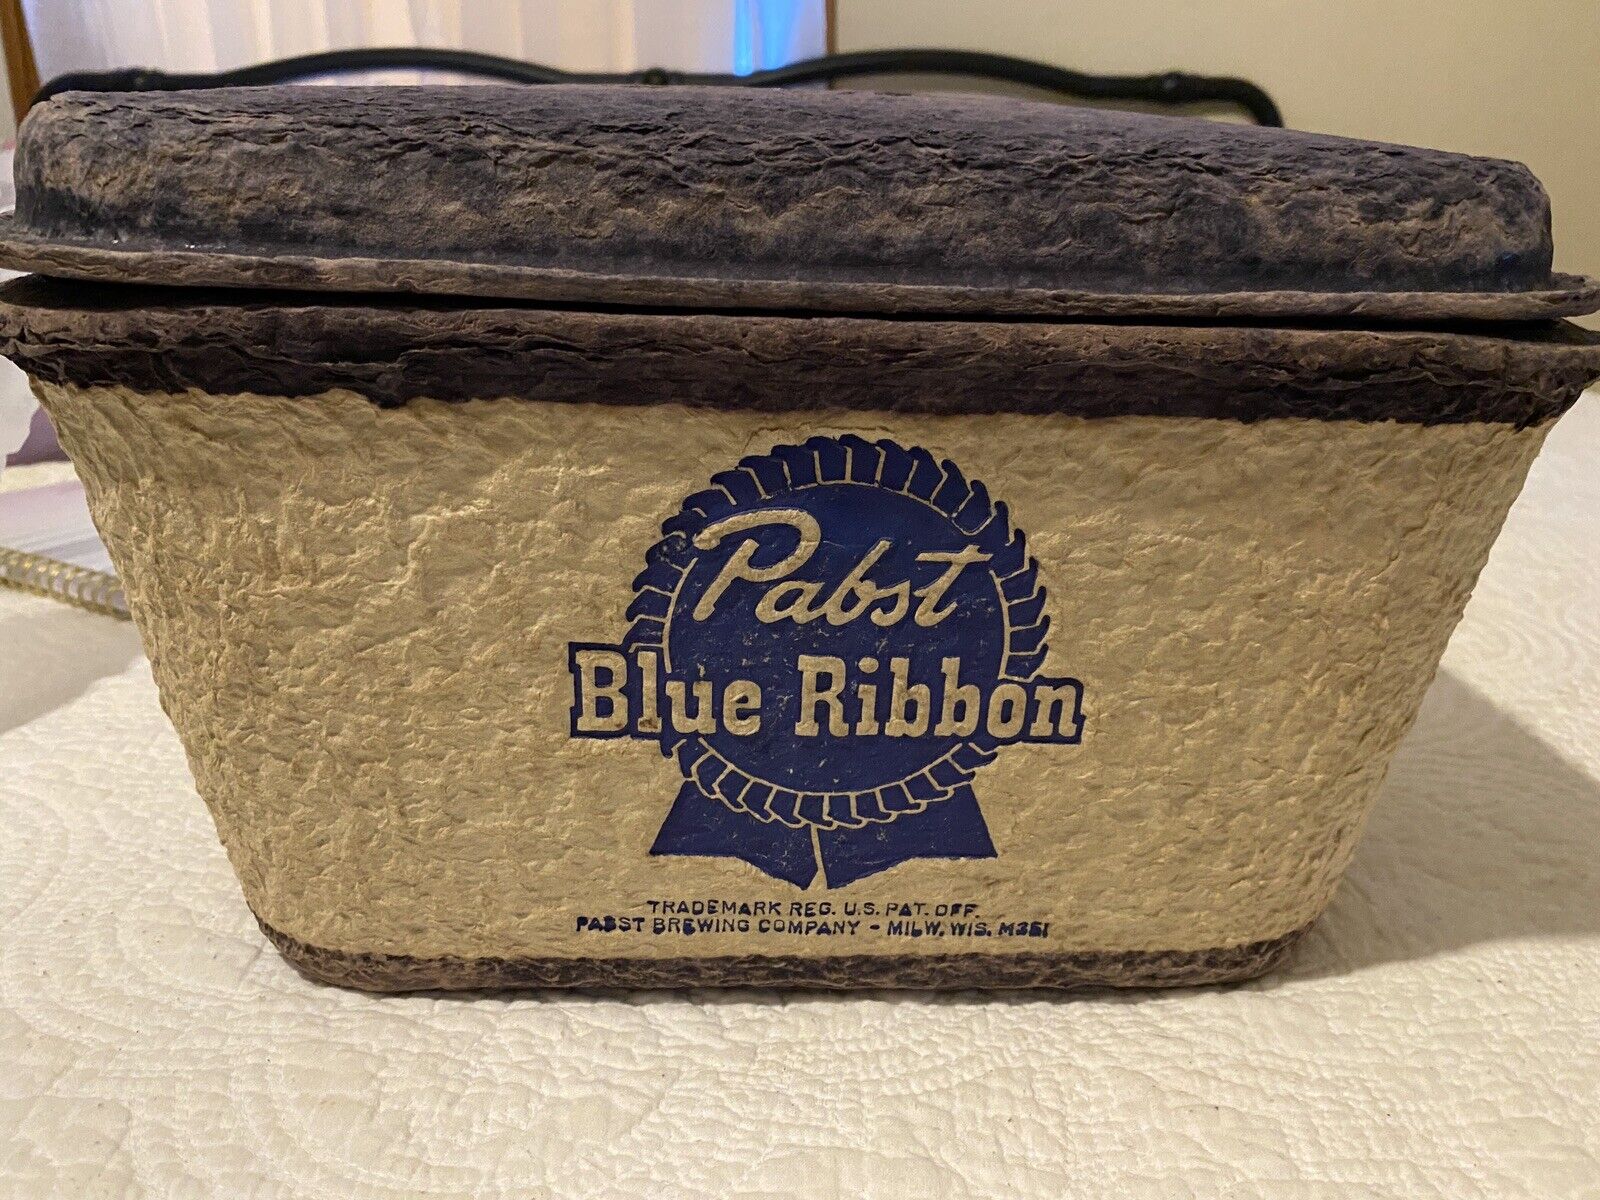 Vintage 1950s 60s Pabst Blue Ribbon Beer Cooler With Canvas Strap & Lid